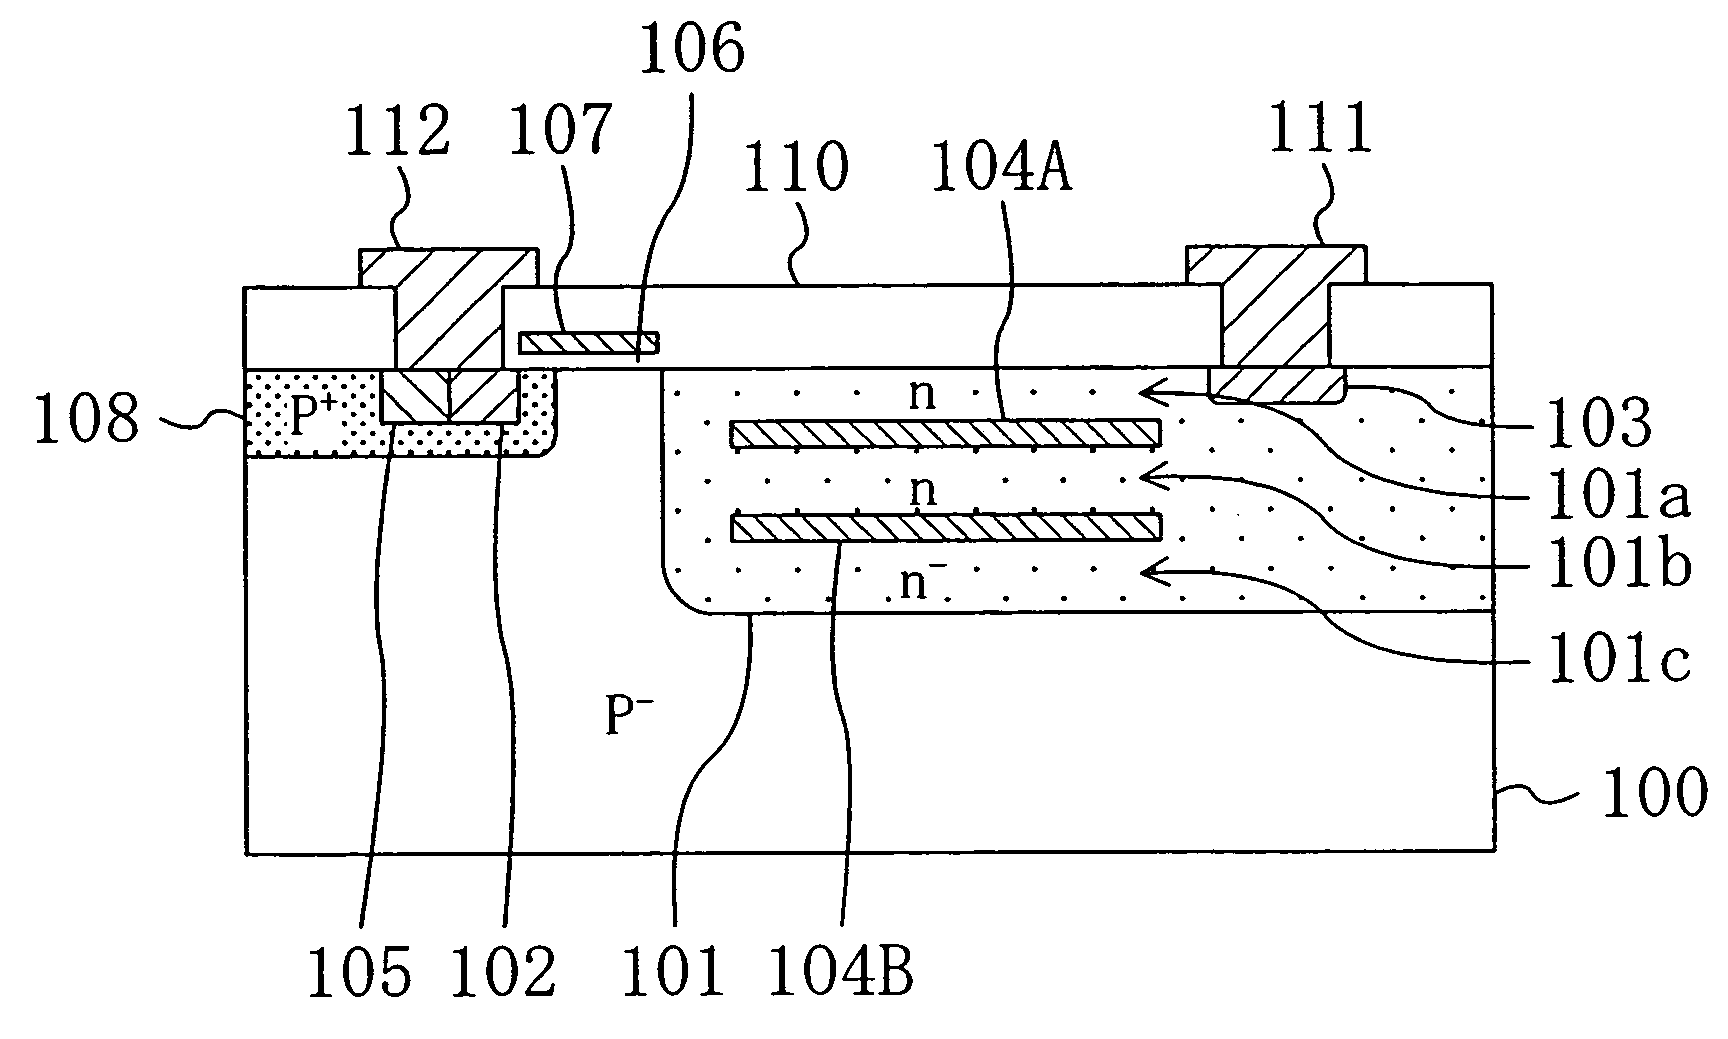 Method of manufacturing a semiconductor device having a high breakdown voltage and low on-resistance